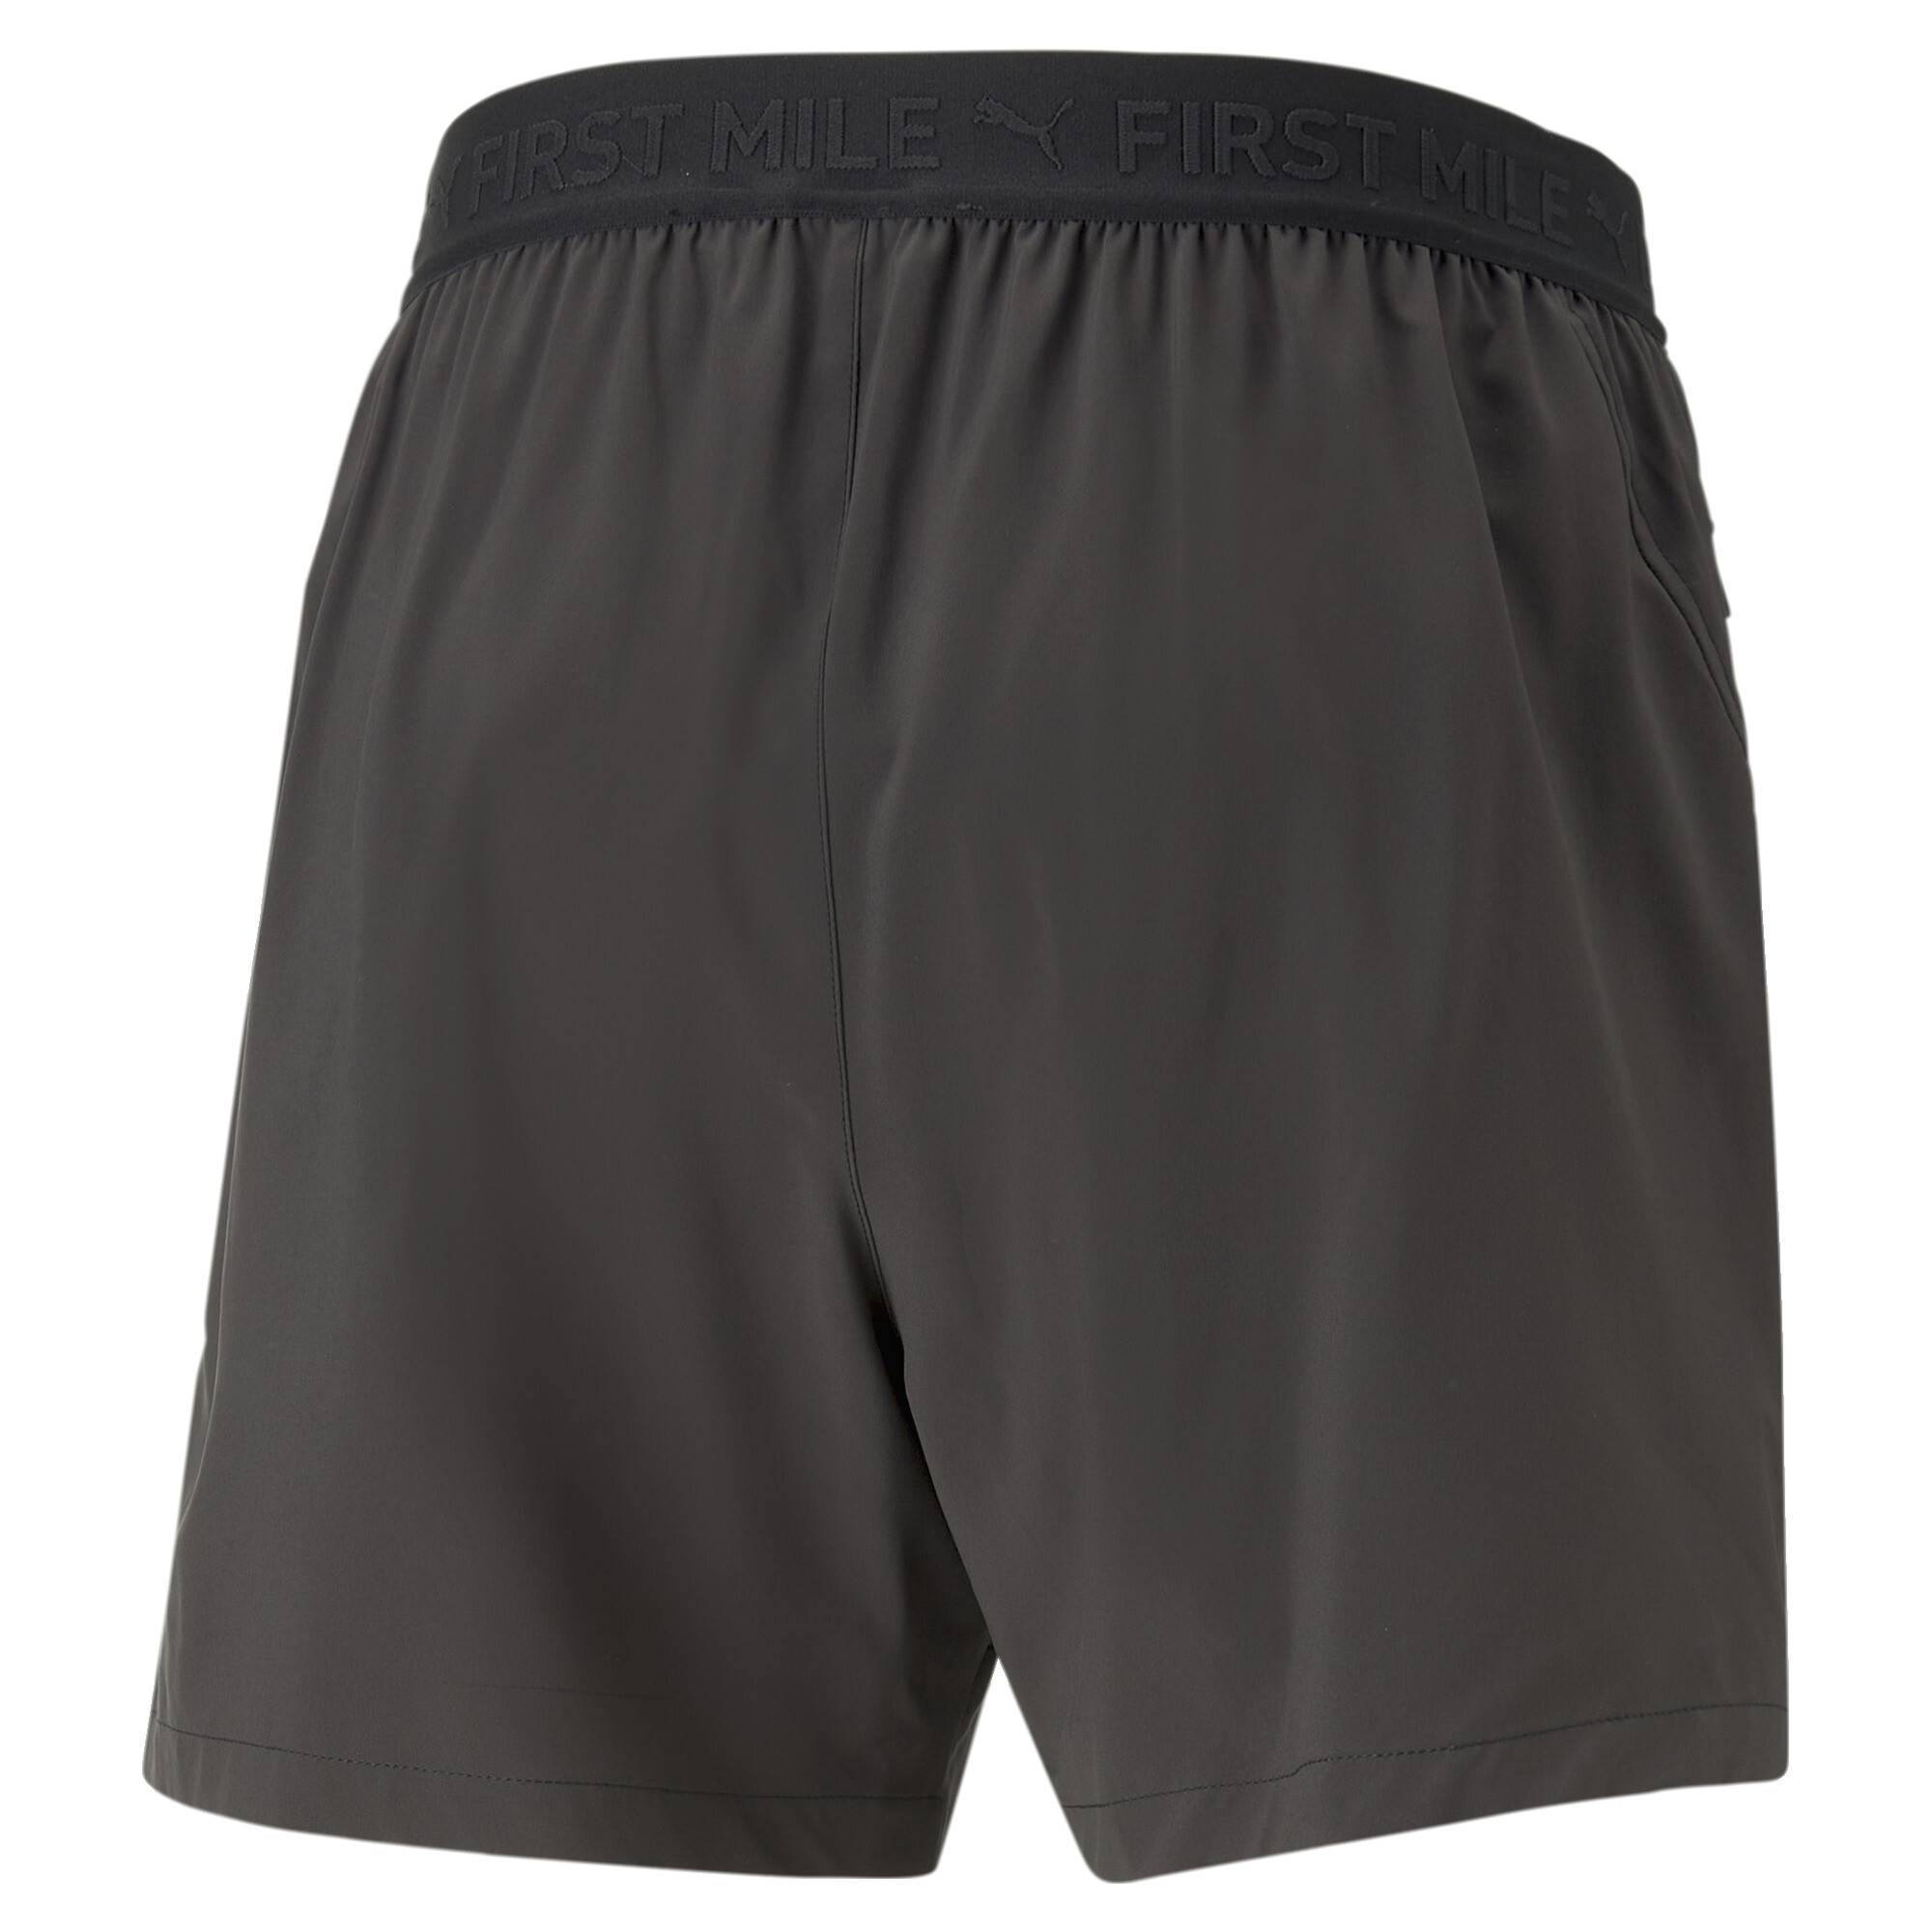 Men's PUMA X First Mile Woven 5 Running Shorts Men In Black, Size XS